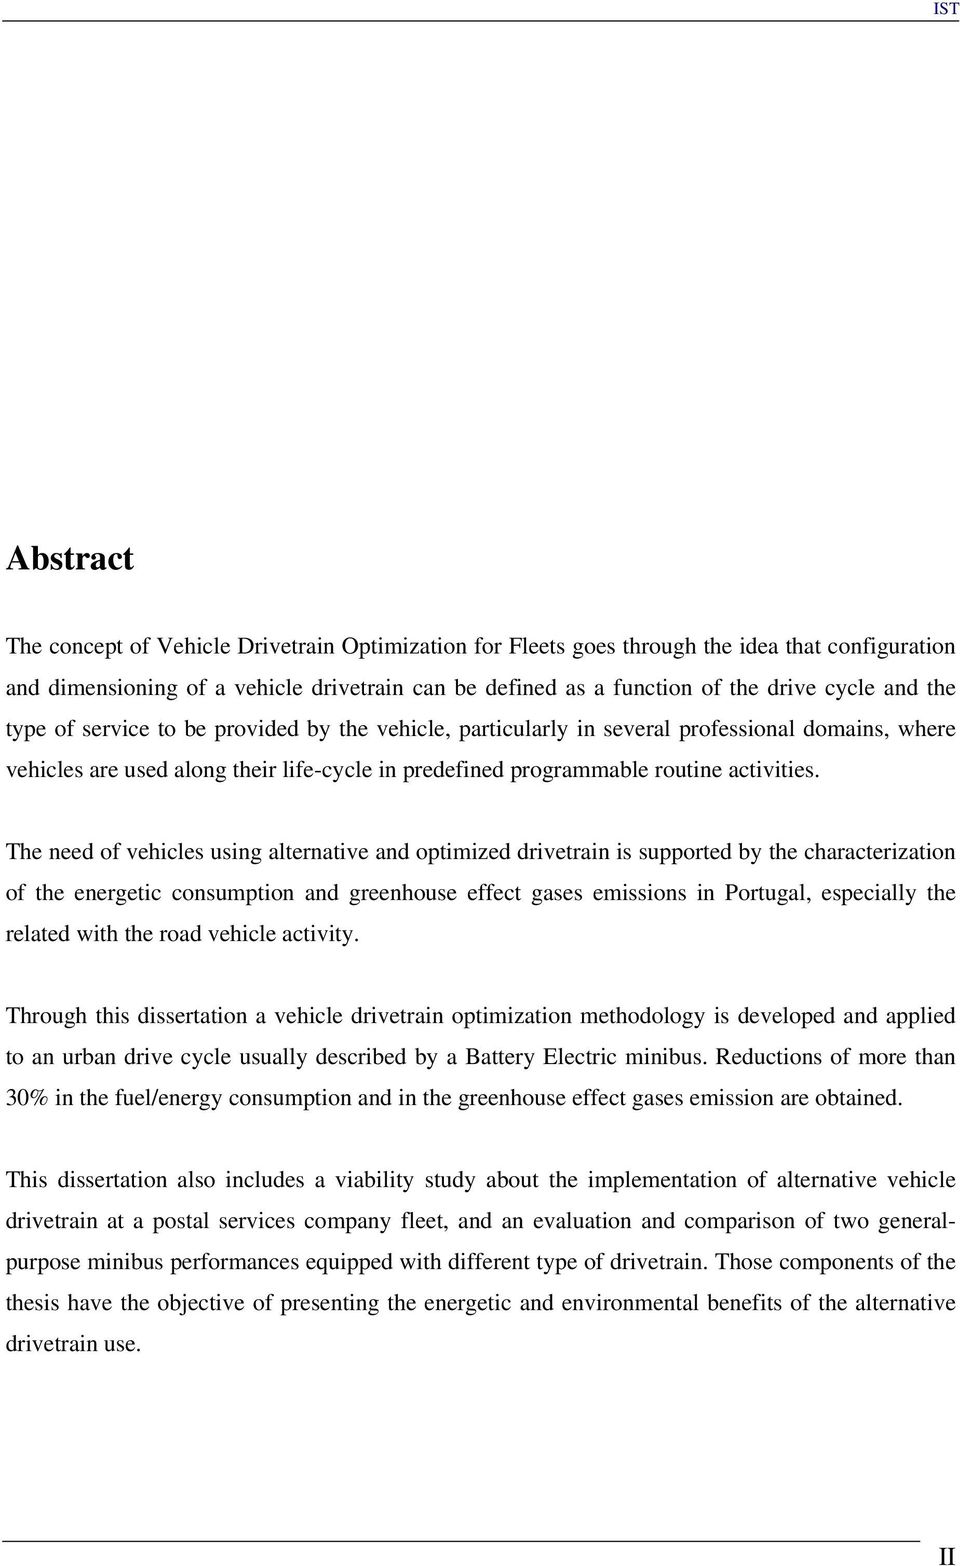 The need of vehicles using alternative and optimized drivetrain is supported by the characterization of the energetic consumption and greenhouse effect gases emissions in Portugal, especially the